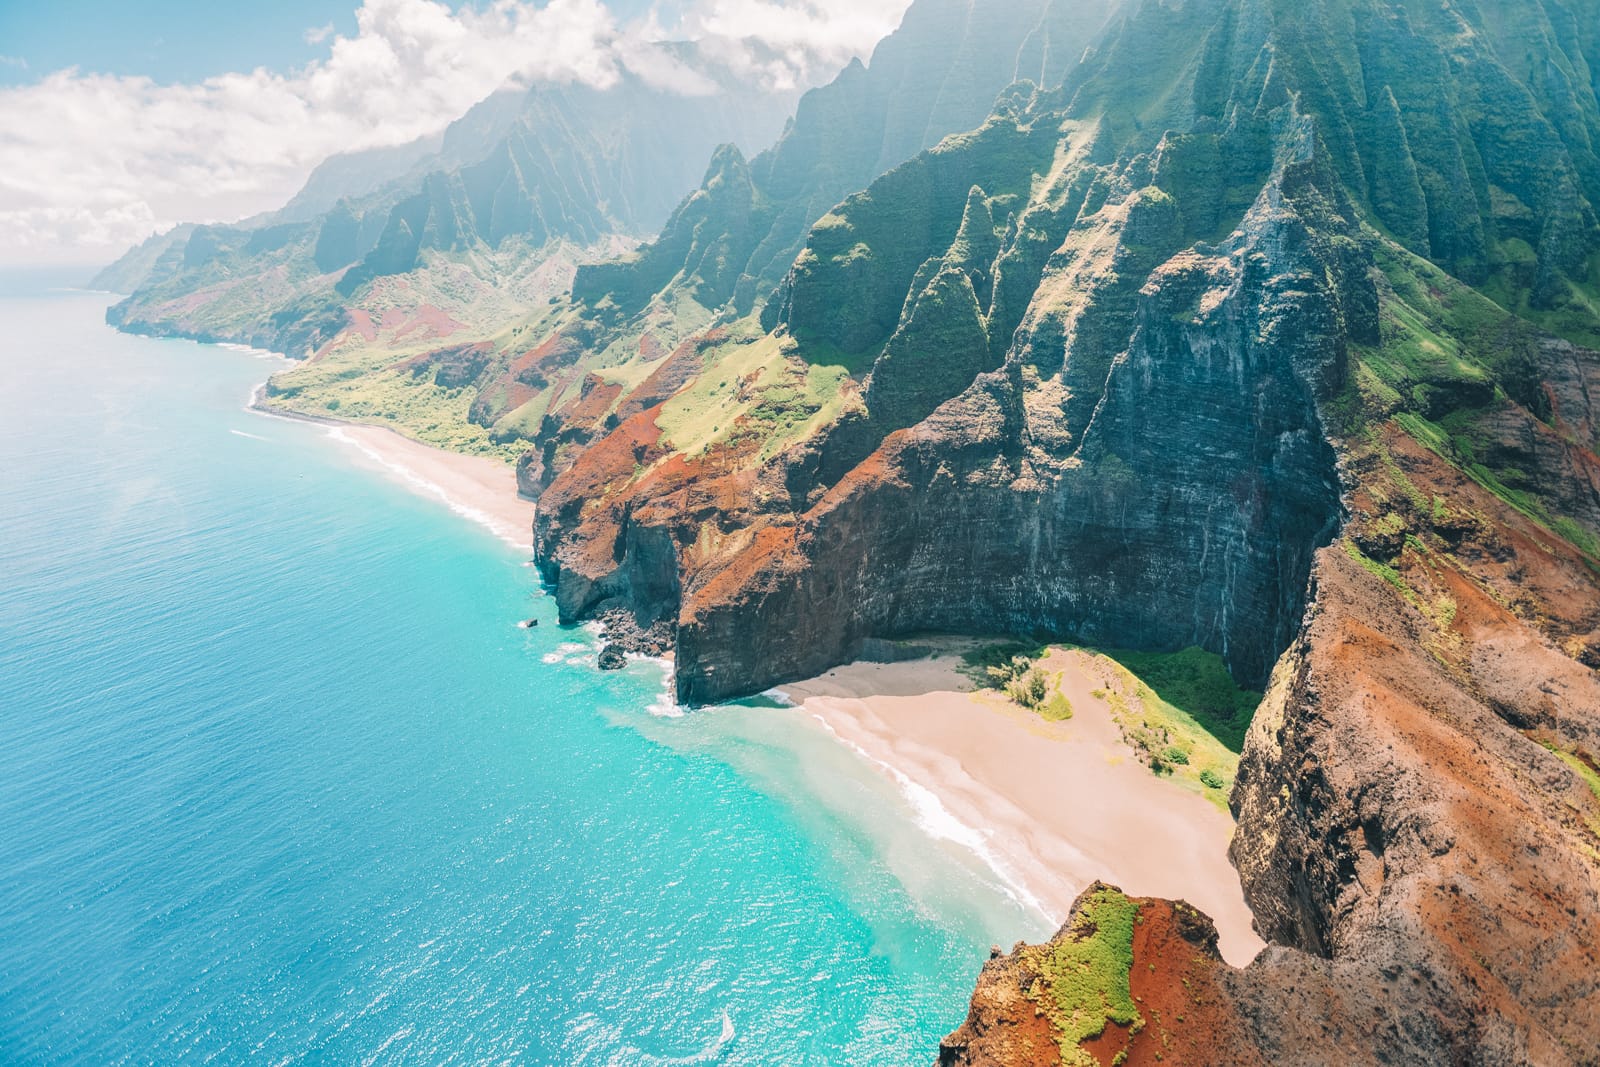 Hawaii – One of the most best vacation spot in the world